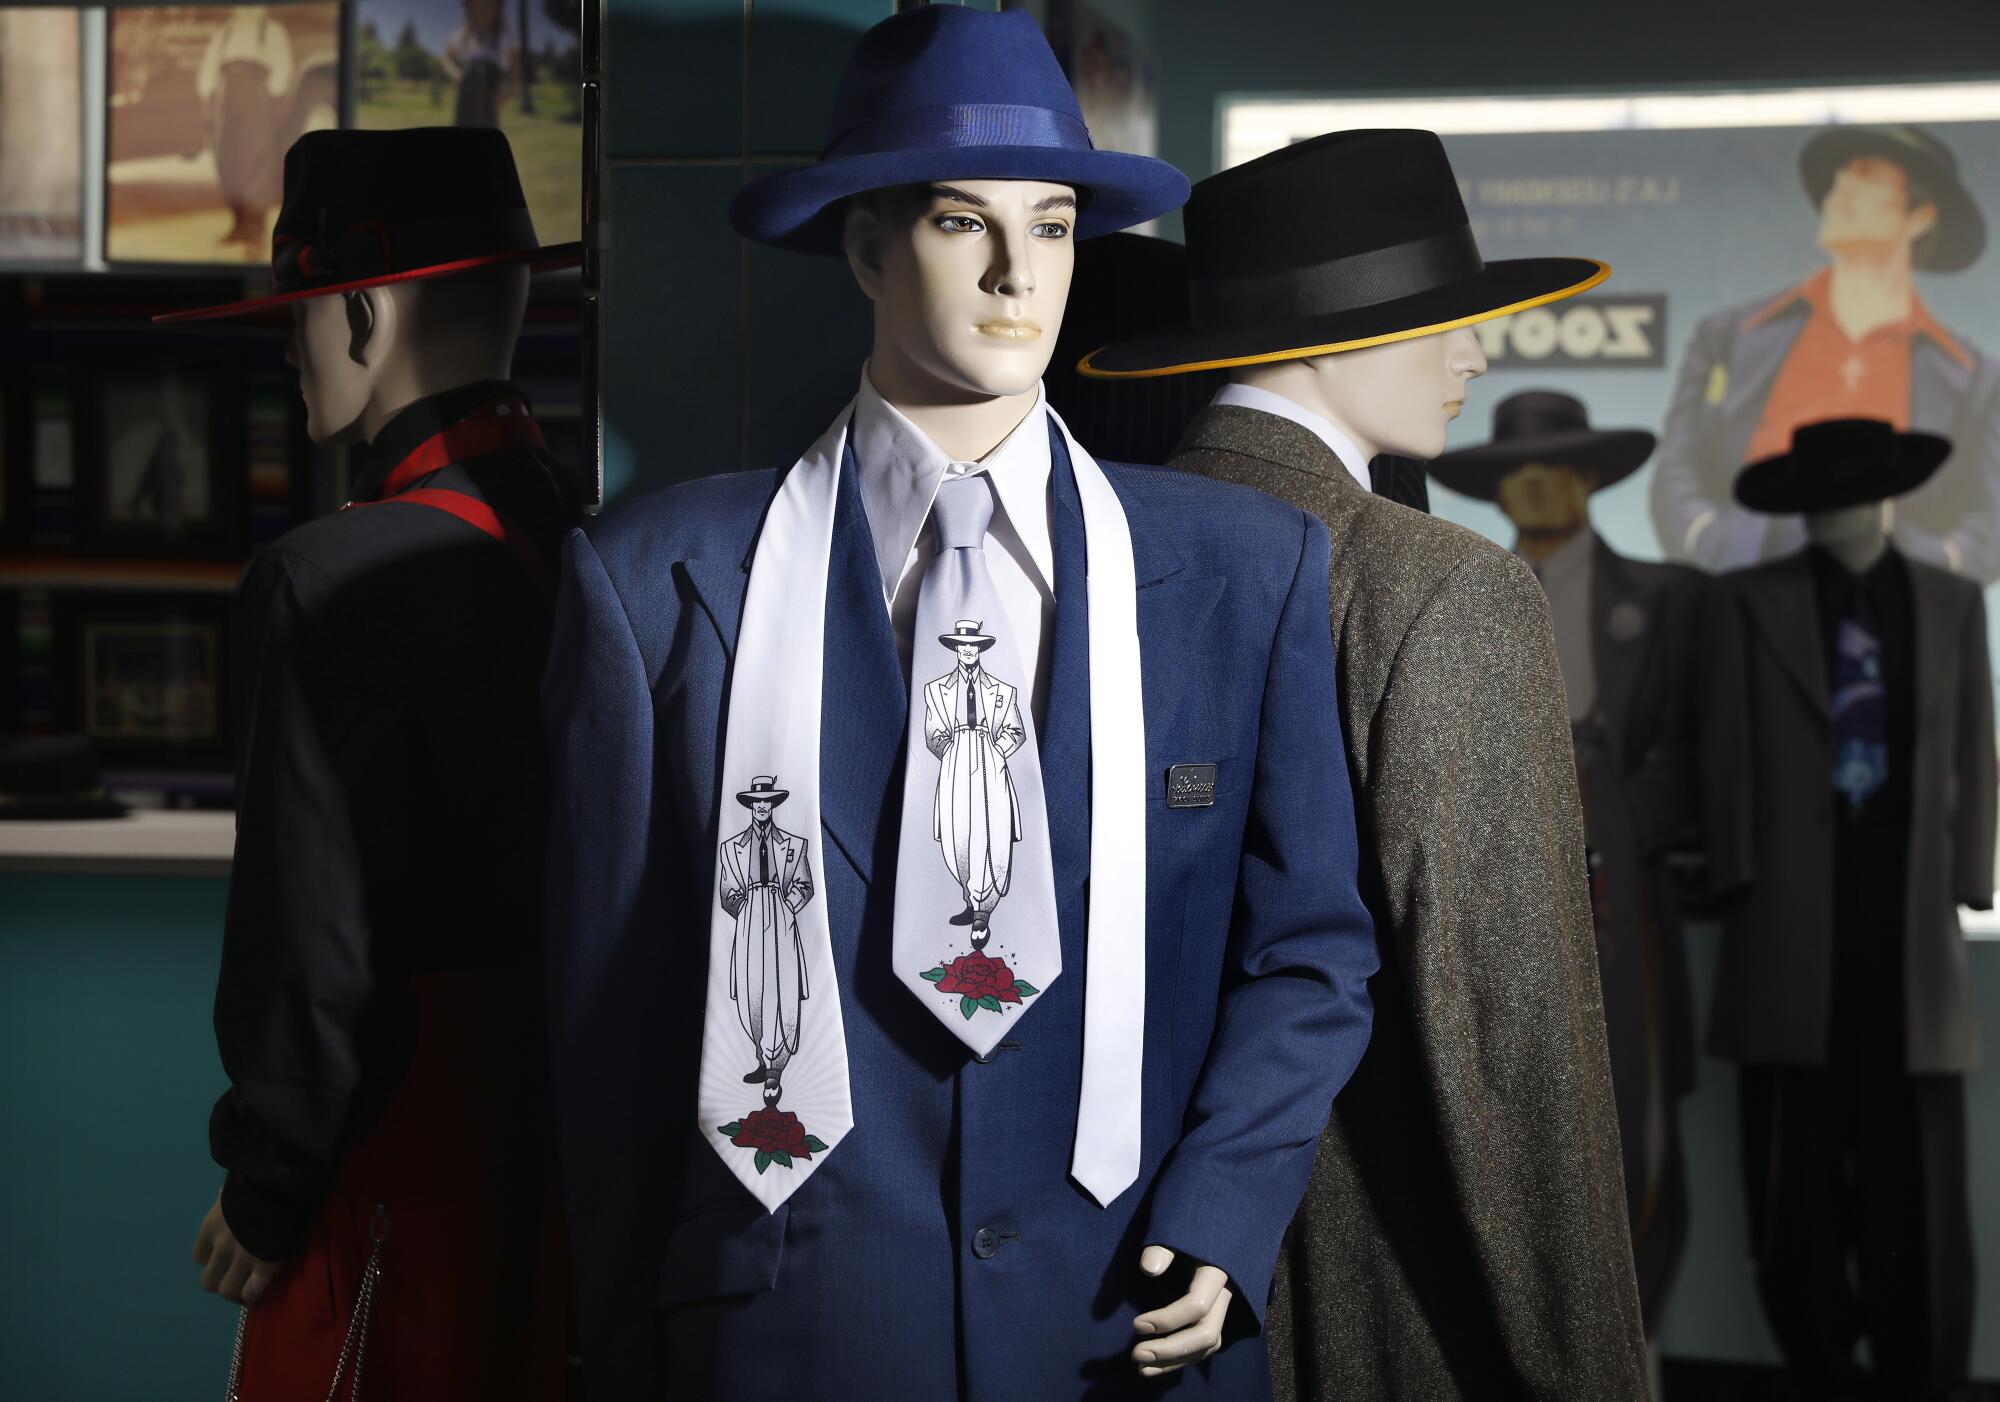 A mannequin sports a blue zoot suit and a wide-brim hat, as well as a tie bearing an image of a zoot suiter.